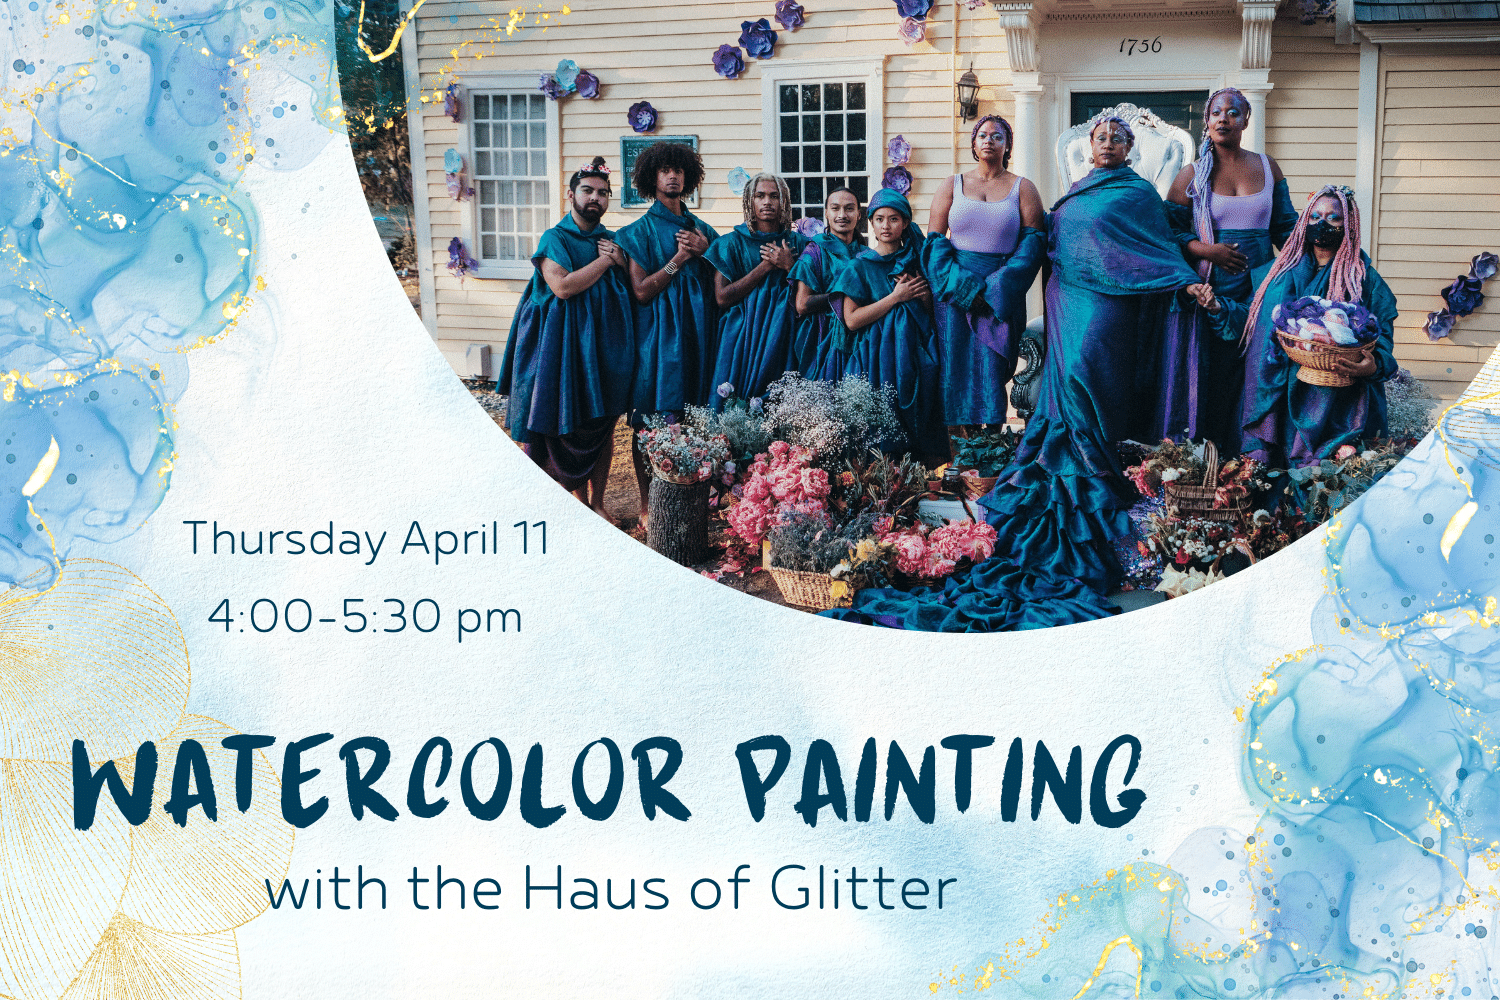 Photo of the Haus of Glitter, a group of people in flowing blue and purple robes, surrounded by flowers, against a watercolor background.